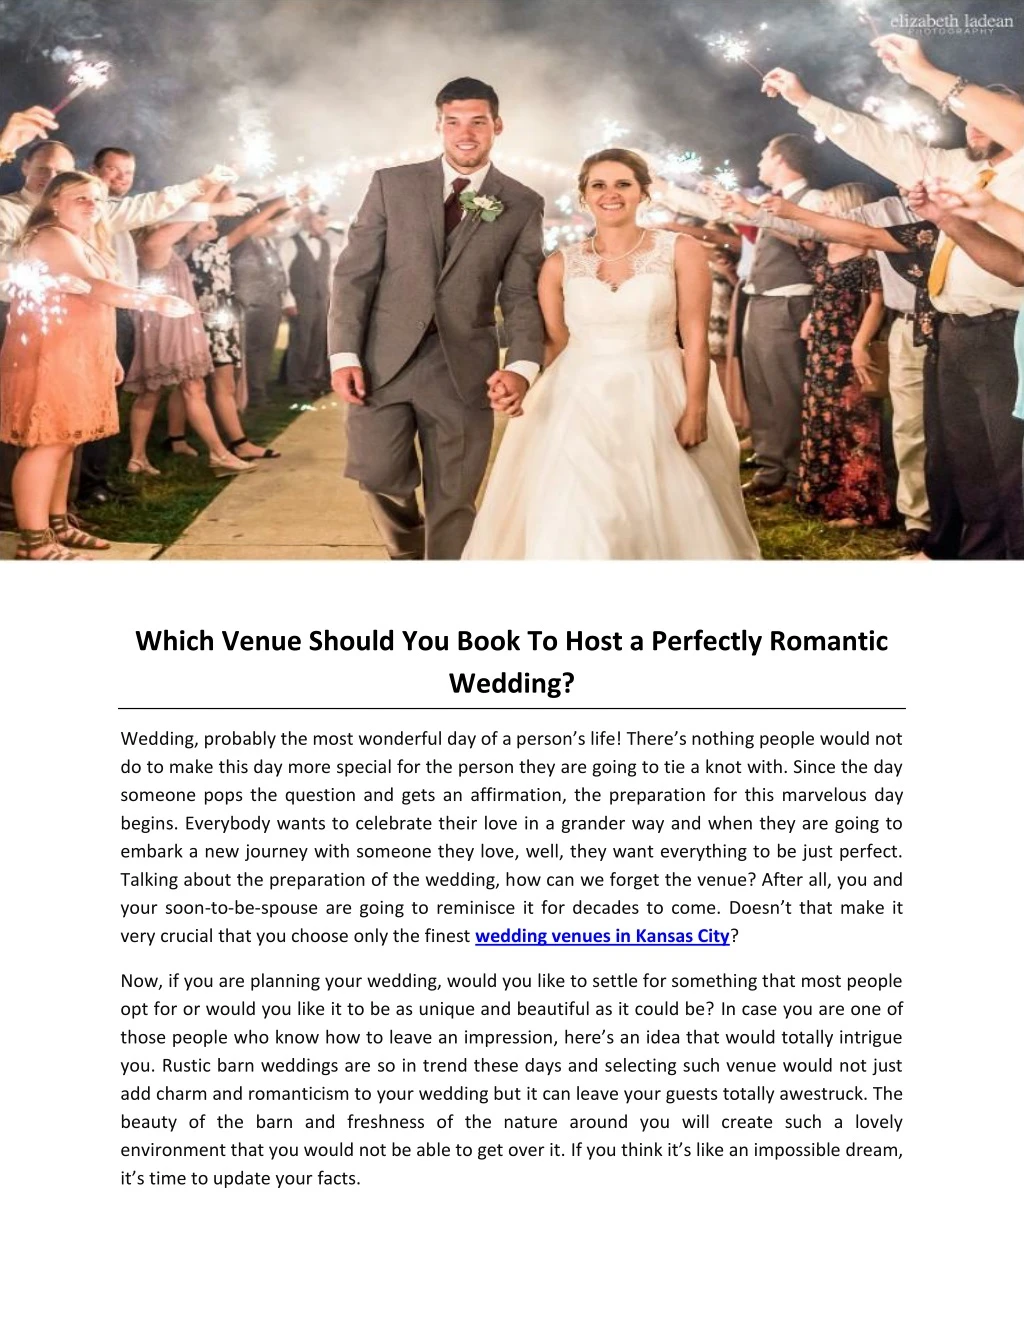 which venue should you book to host a perfectly